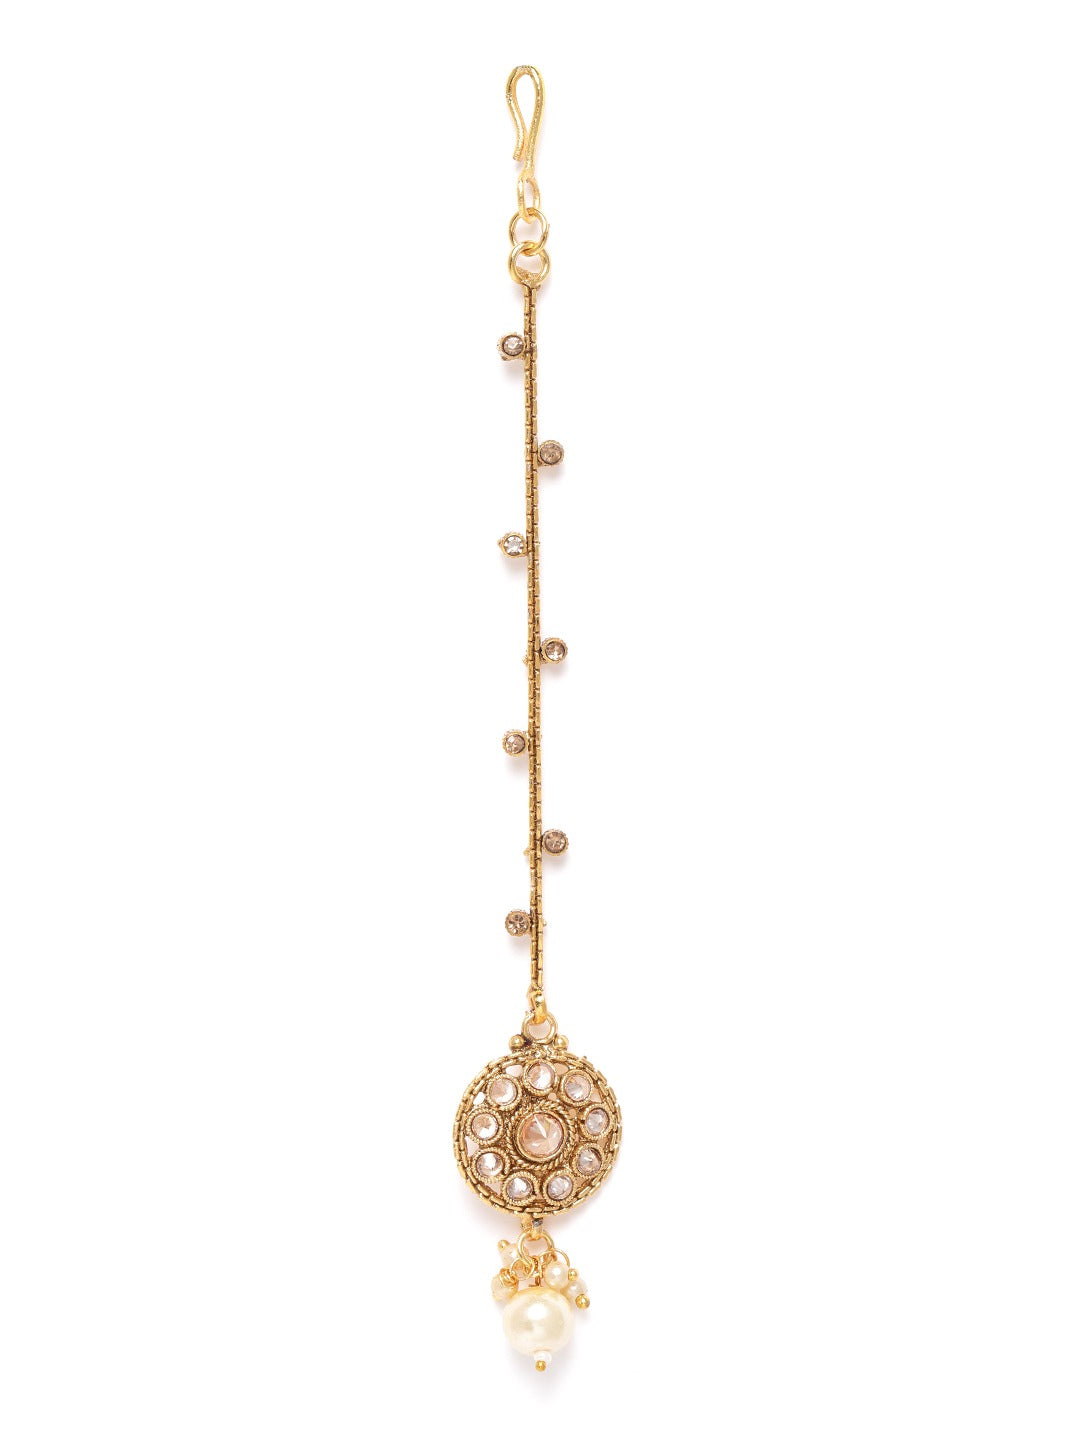 Off-White Gold-Plated Stone-Studded & Beaded Maang Tikka